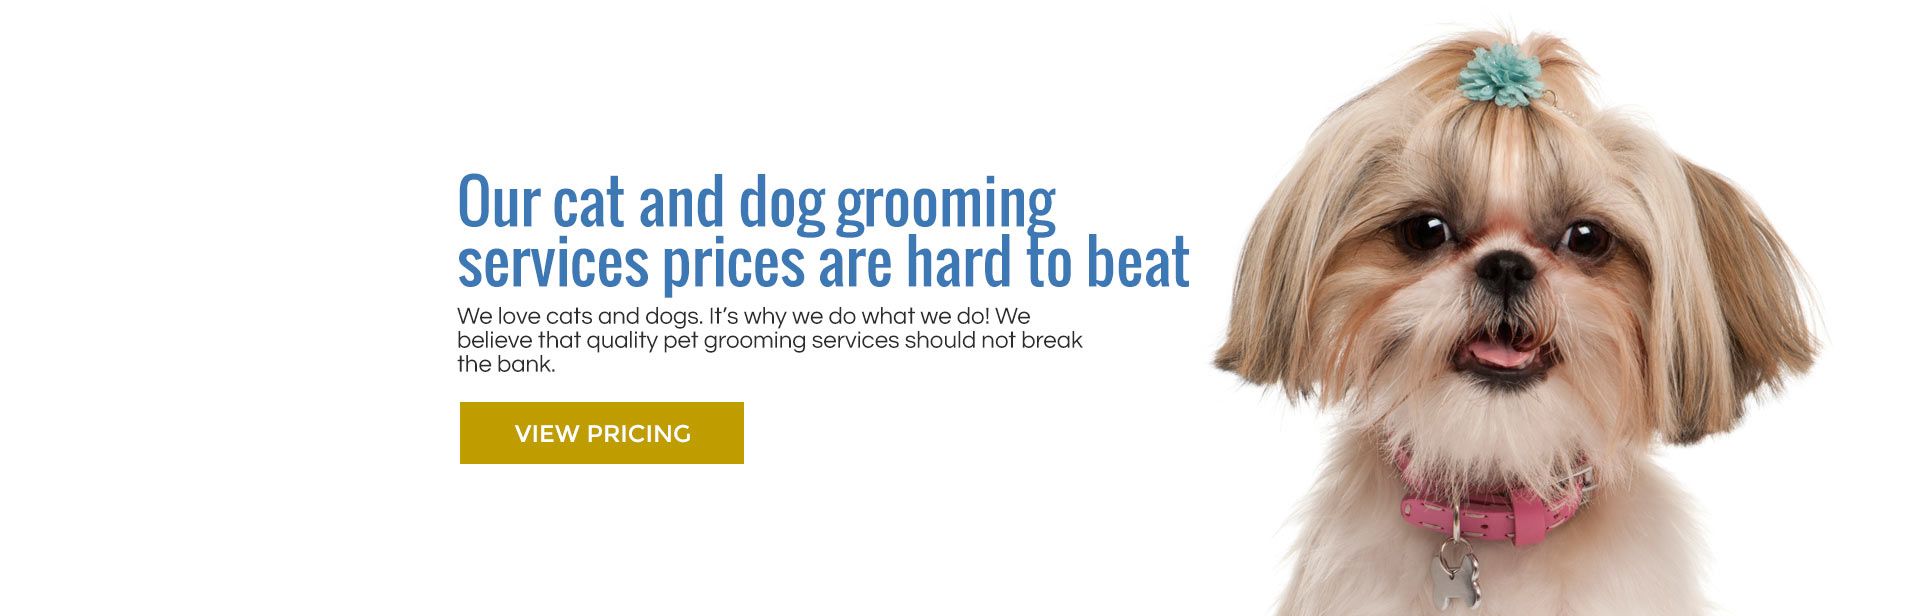 Affordable grooming services for cats and dogs